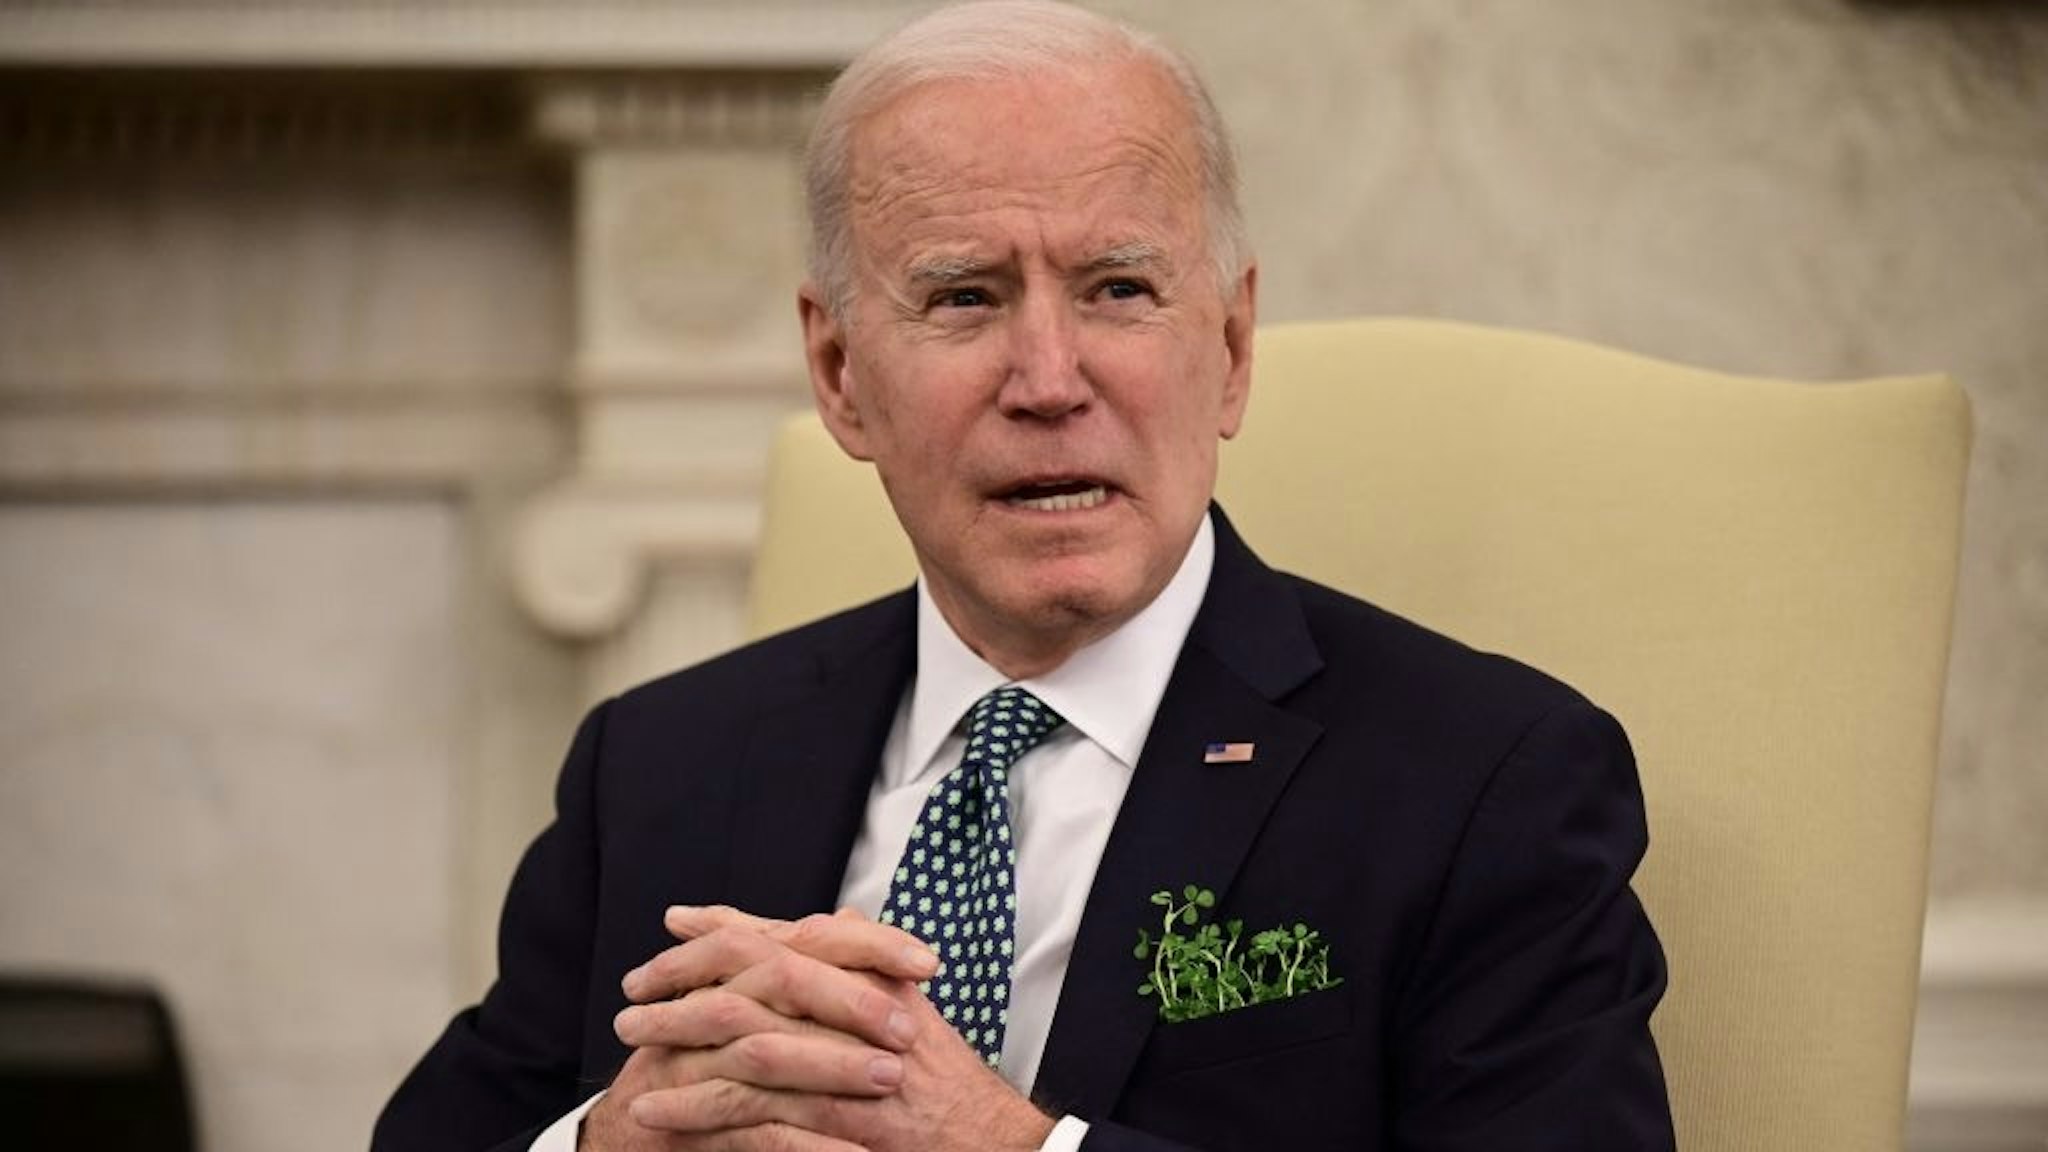 US President Joe Biden speaks on the shooting incident in Atlanta before taking part in a virtual bilateral meeting with Irish Prime Minister Micheál Martin in the Oval Office at the White House on March 17, 2021 in Washington,DC. (Photo by JIM WATSON / AFP) (Photo by JIM WATSON/AFP via Getty Images)